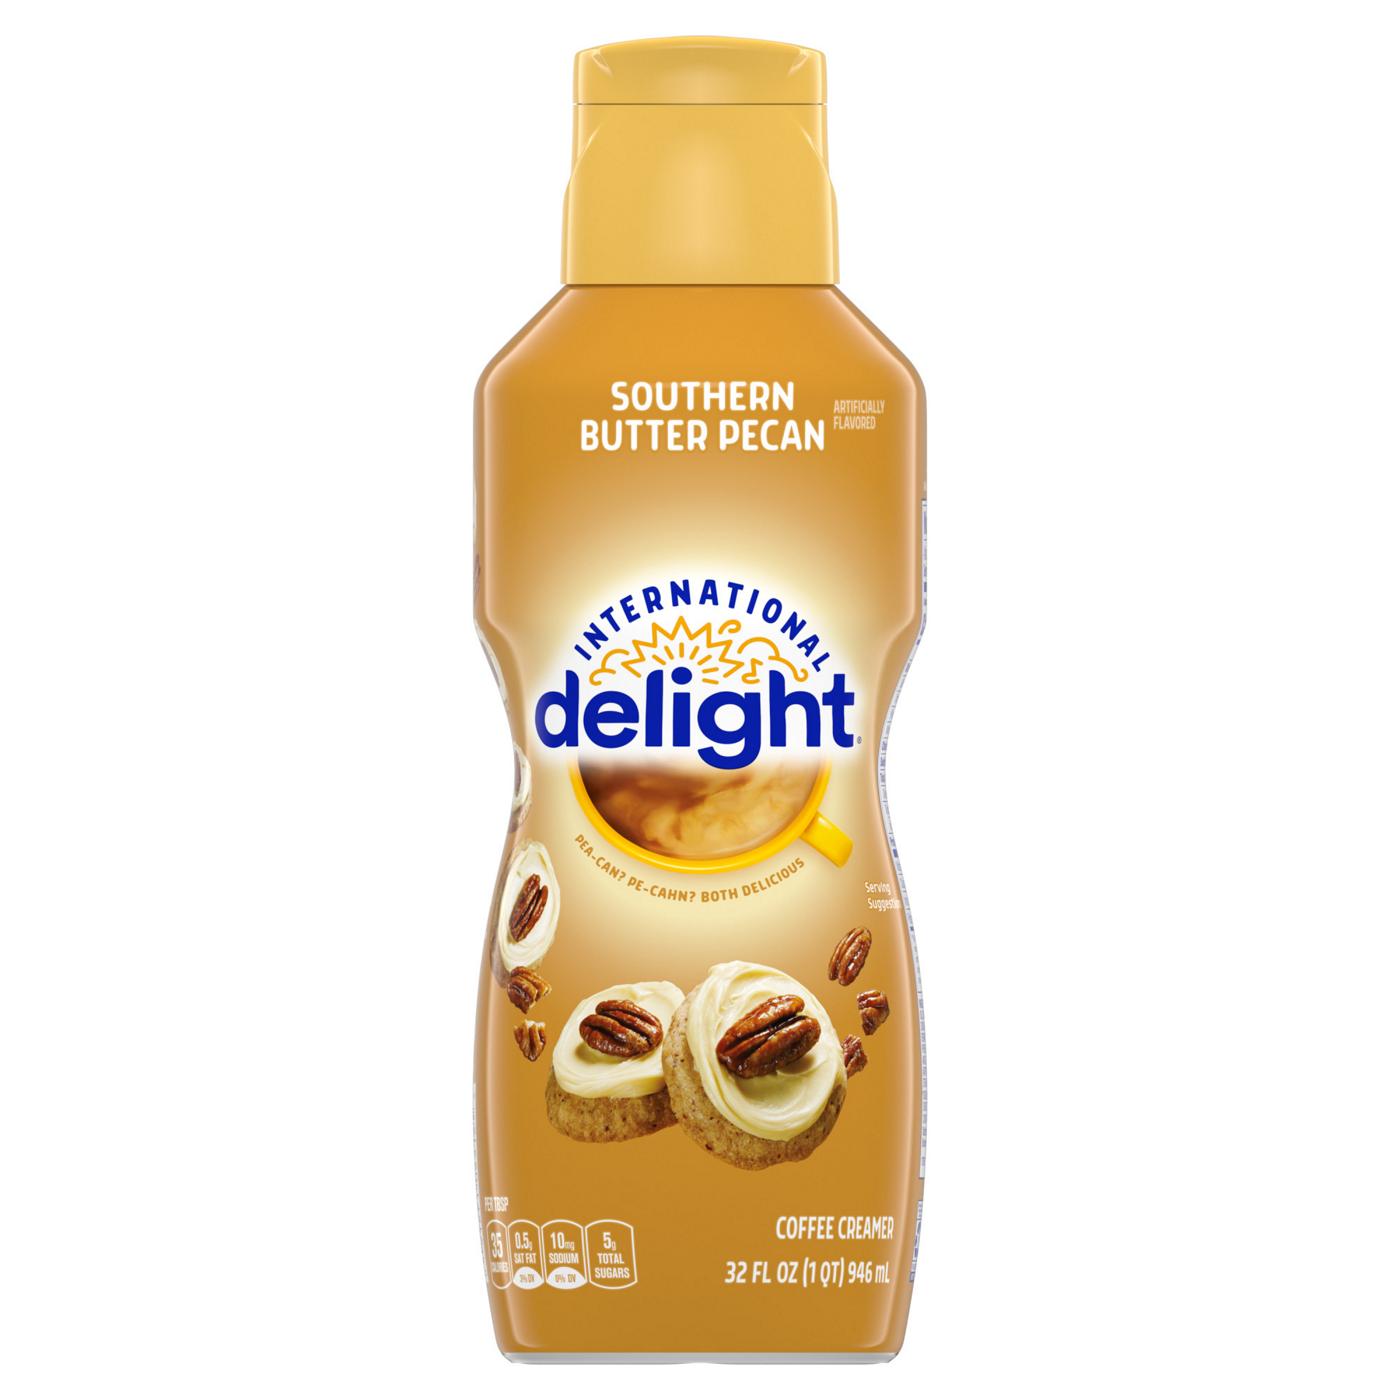 International Delight Southern Butter Pecan Liquid Coffee Creamer; image 1 of 2